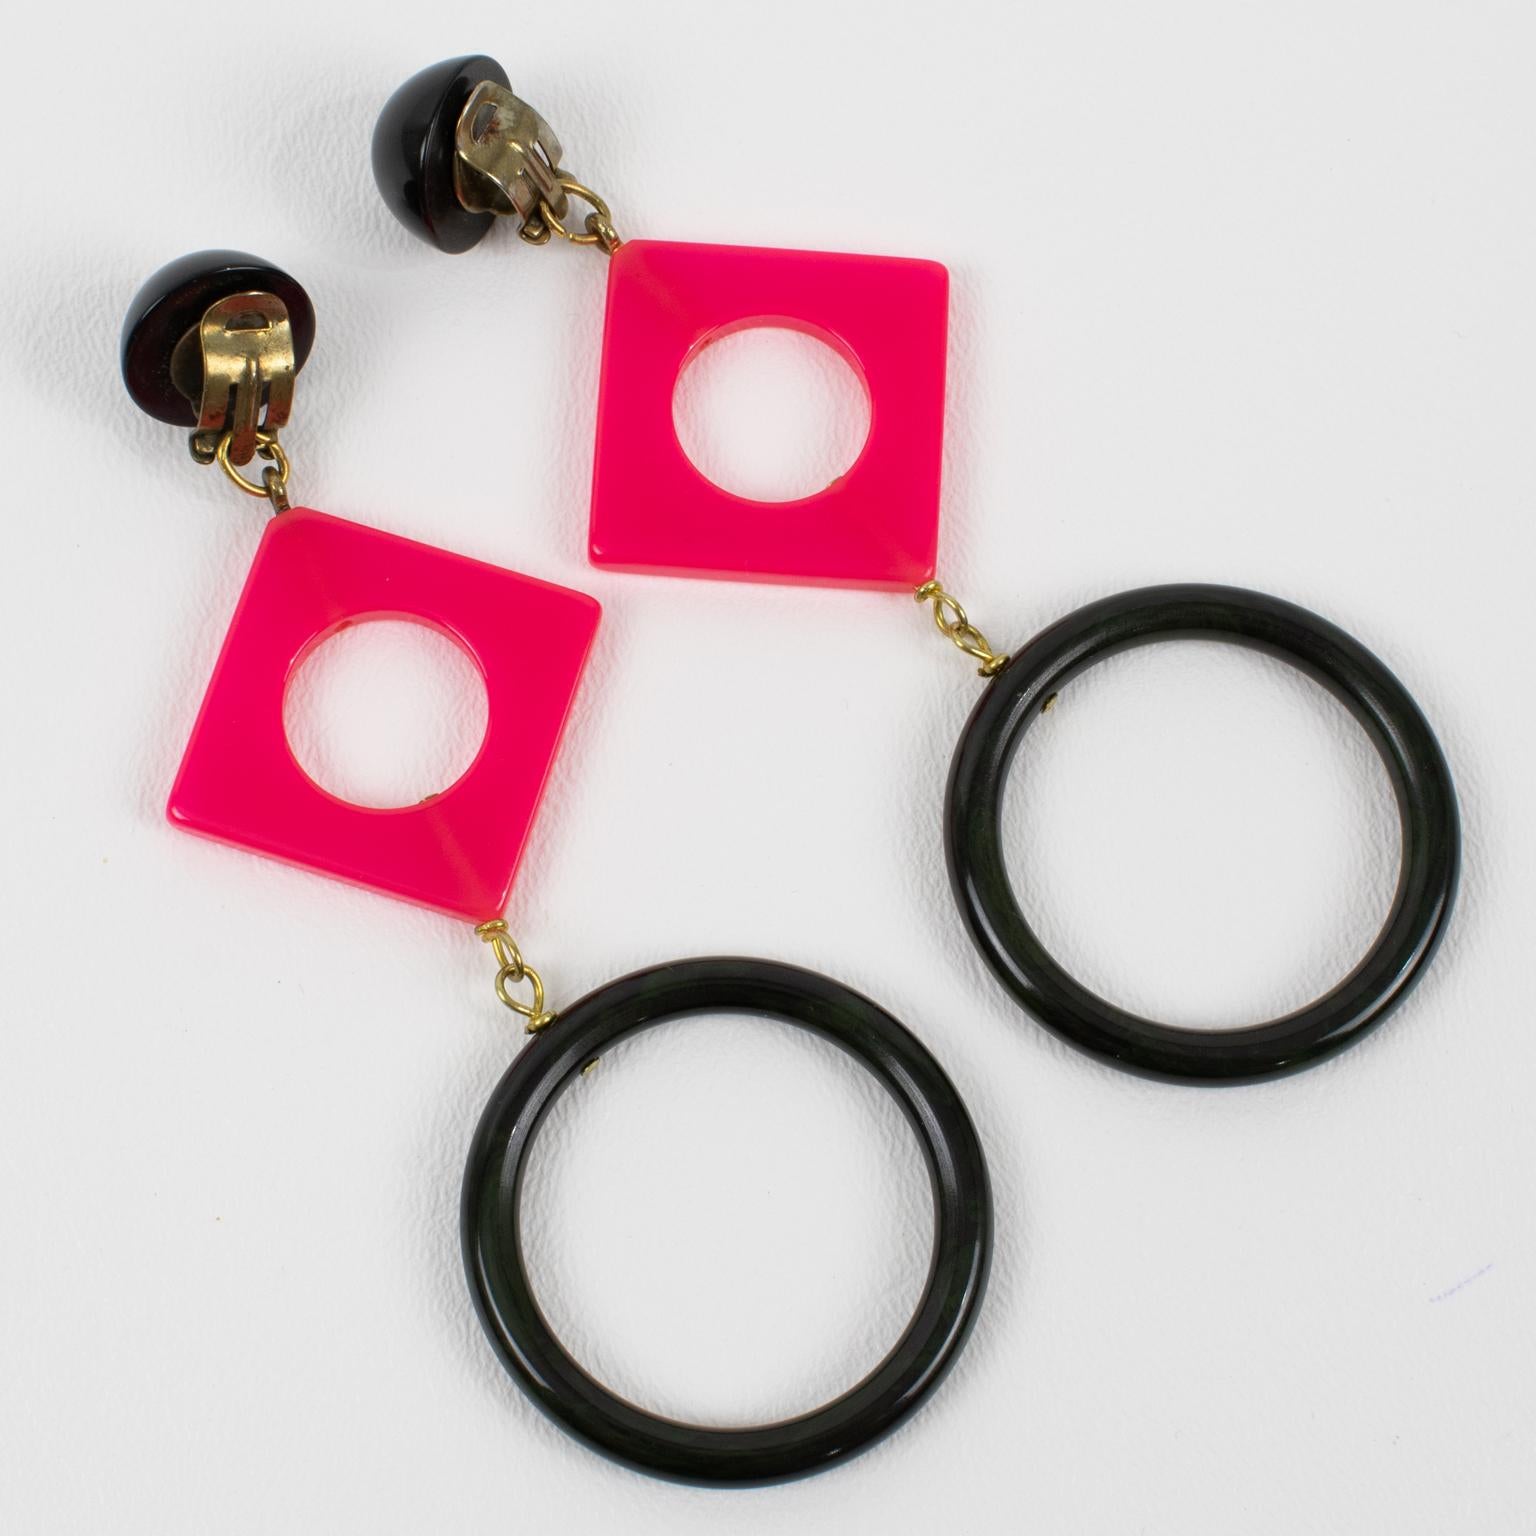 Bakelite Dangle Clip Earrings Black and Hot Pink Colors Pop Art Style In Excellent Condition For Sale In Atlanta, GA